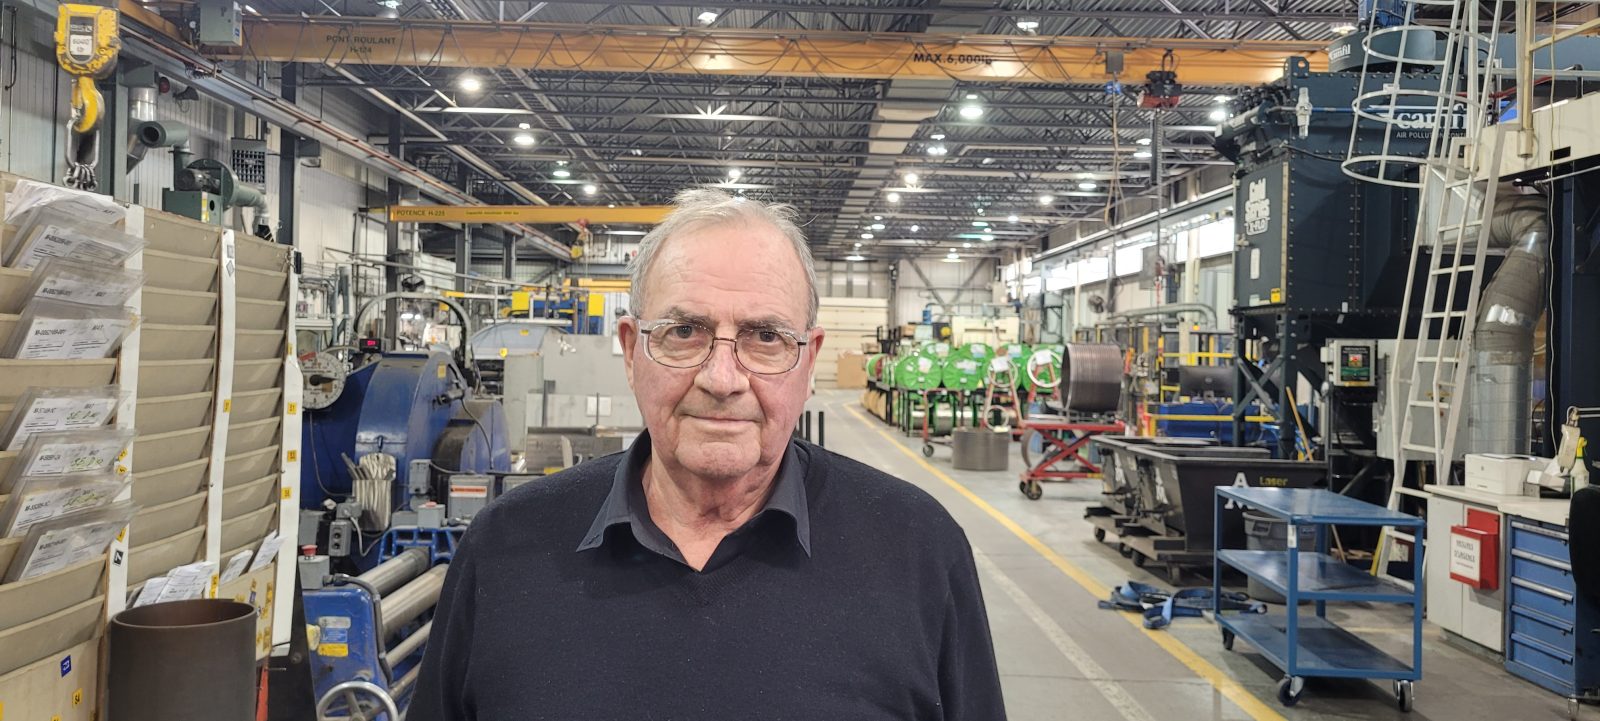 Lennoxville native celebrates 50 years at local factory